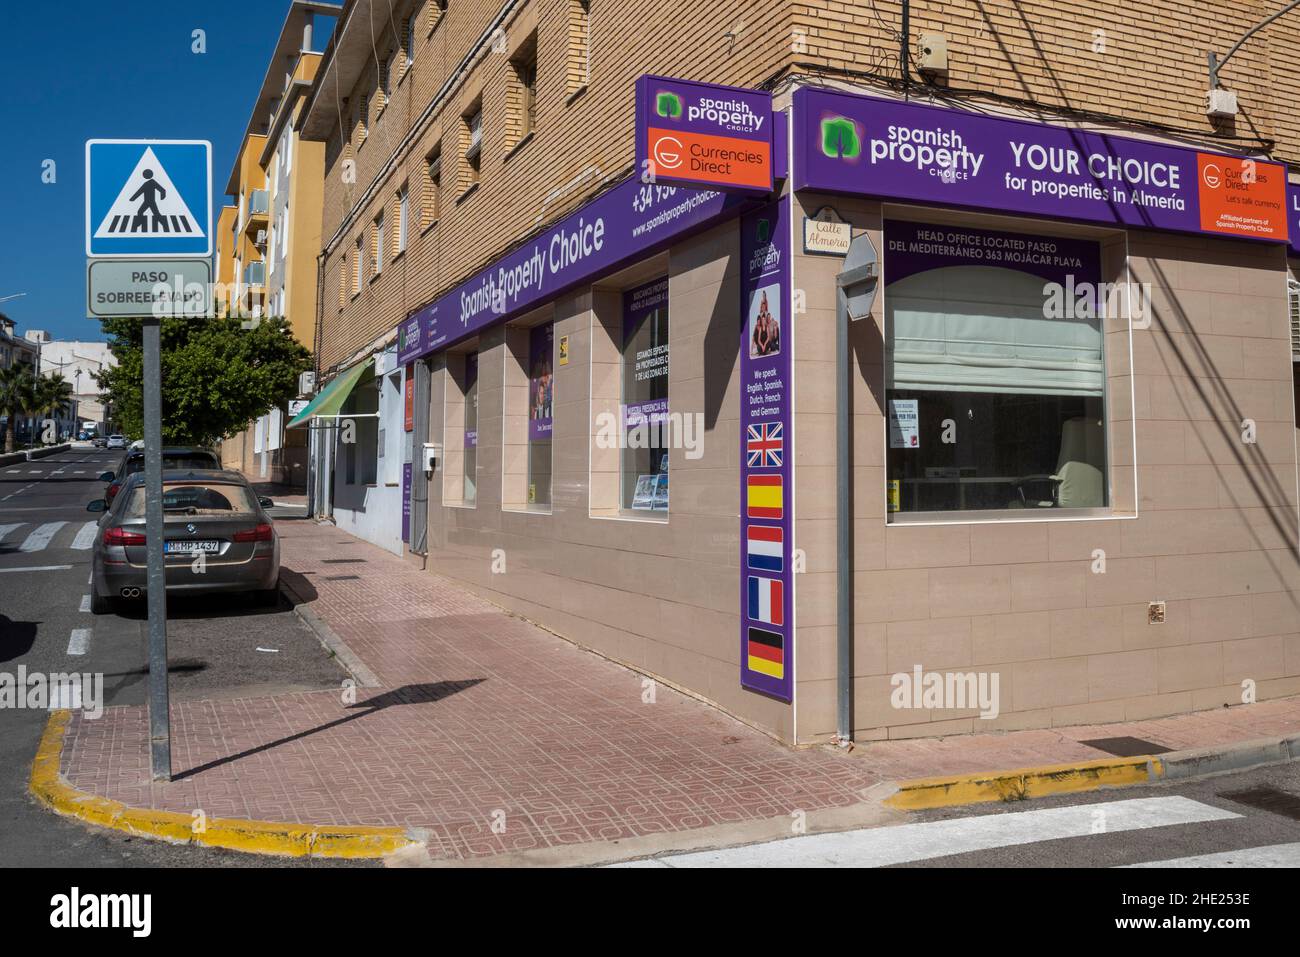 Spanish Property Choice estate agent office in Albox, Almeria, Spain. Business owned by the Garners, from Channel 4 show Sun, Sea & Selling Houses Stock Photo